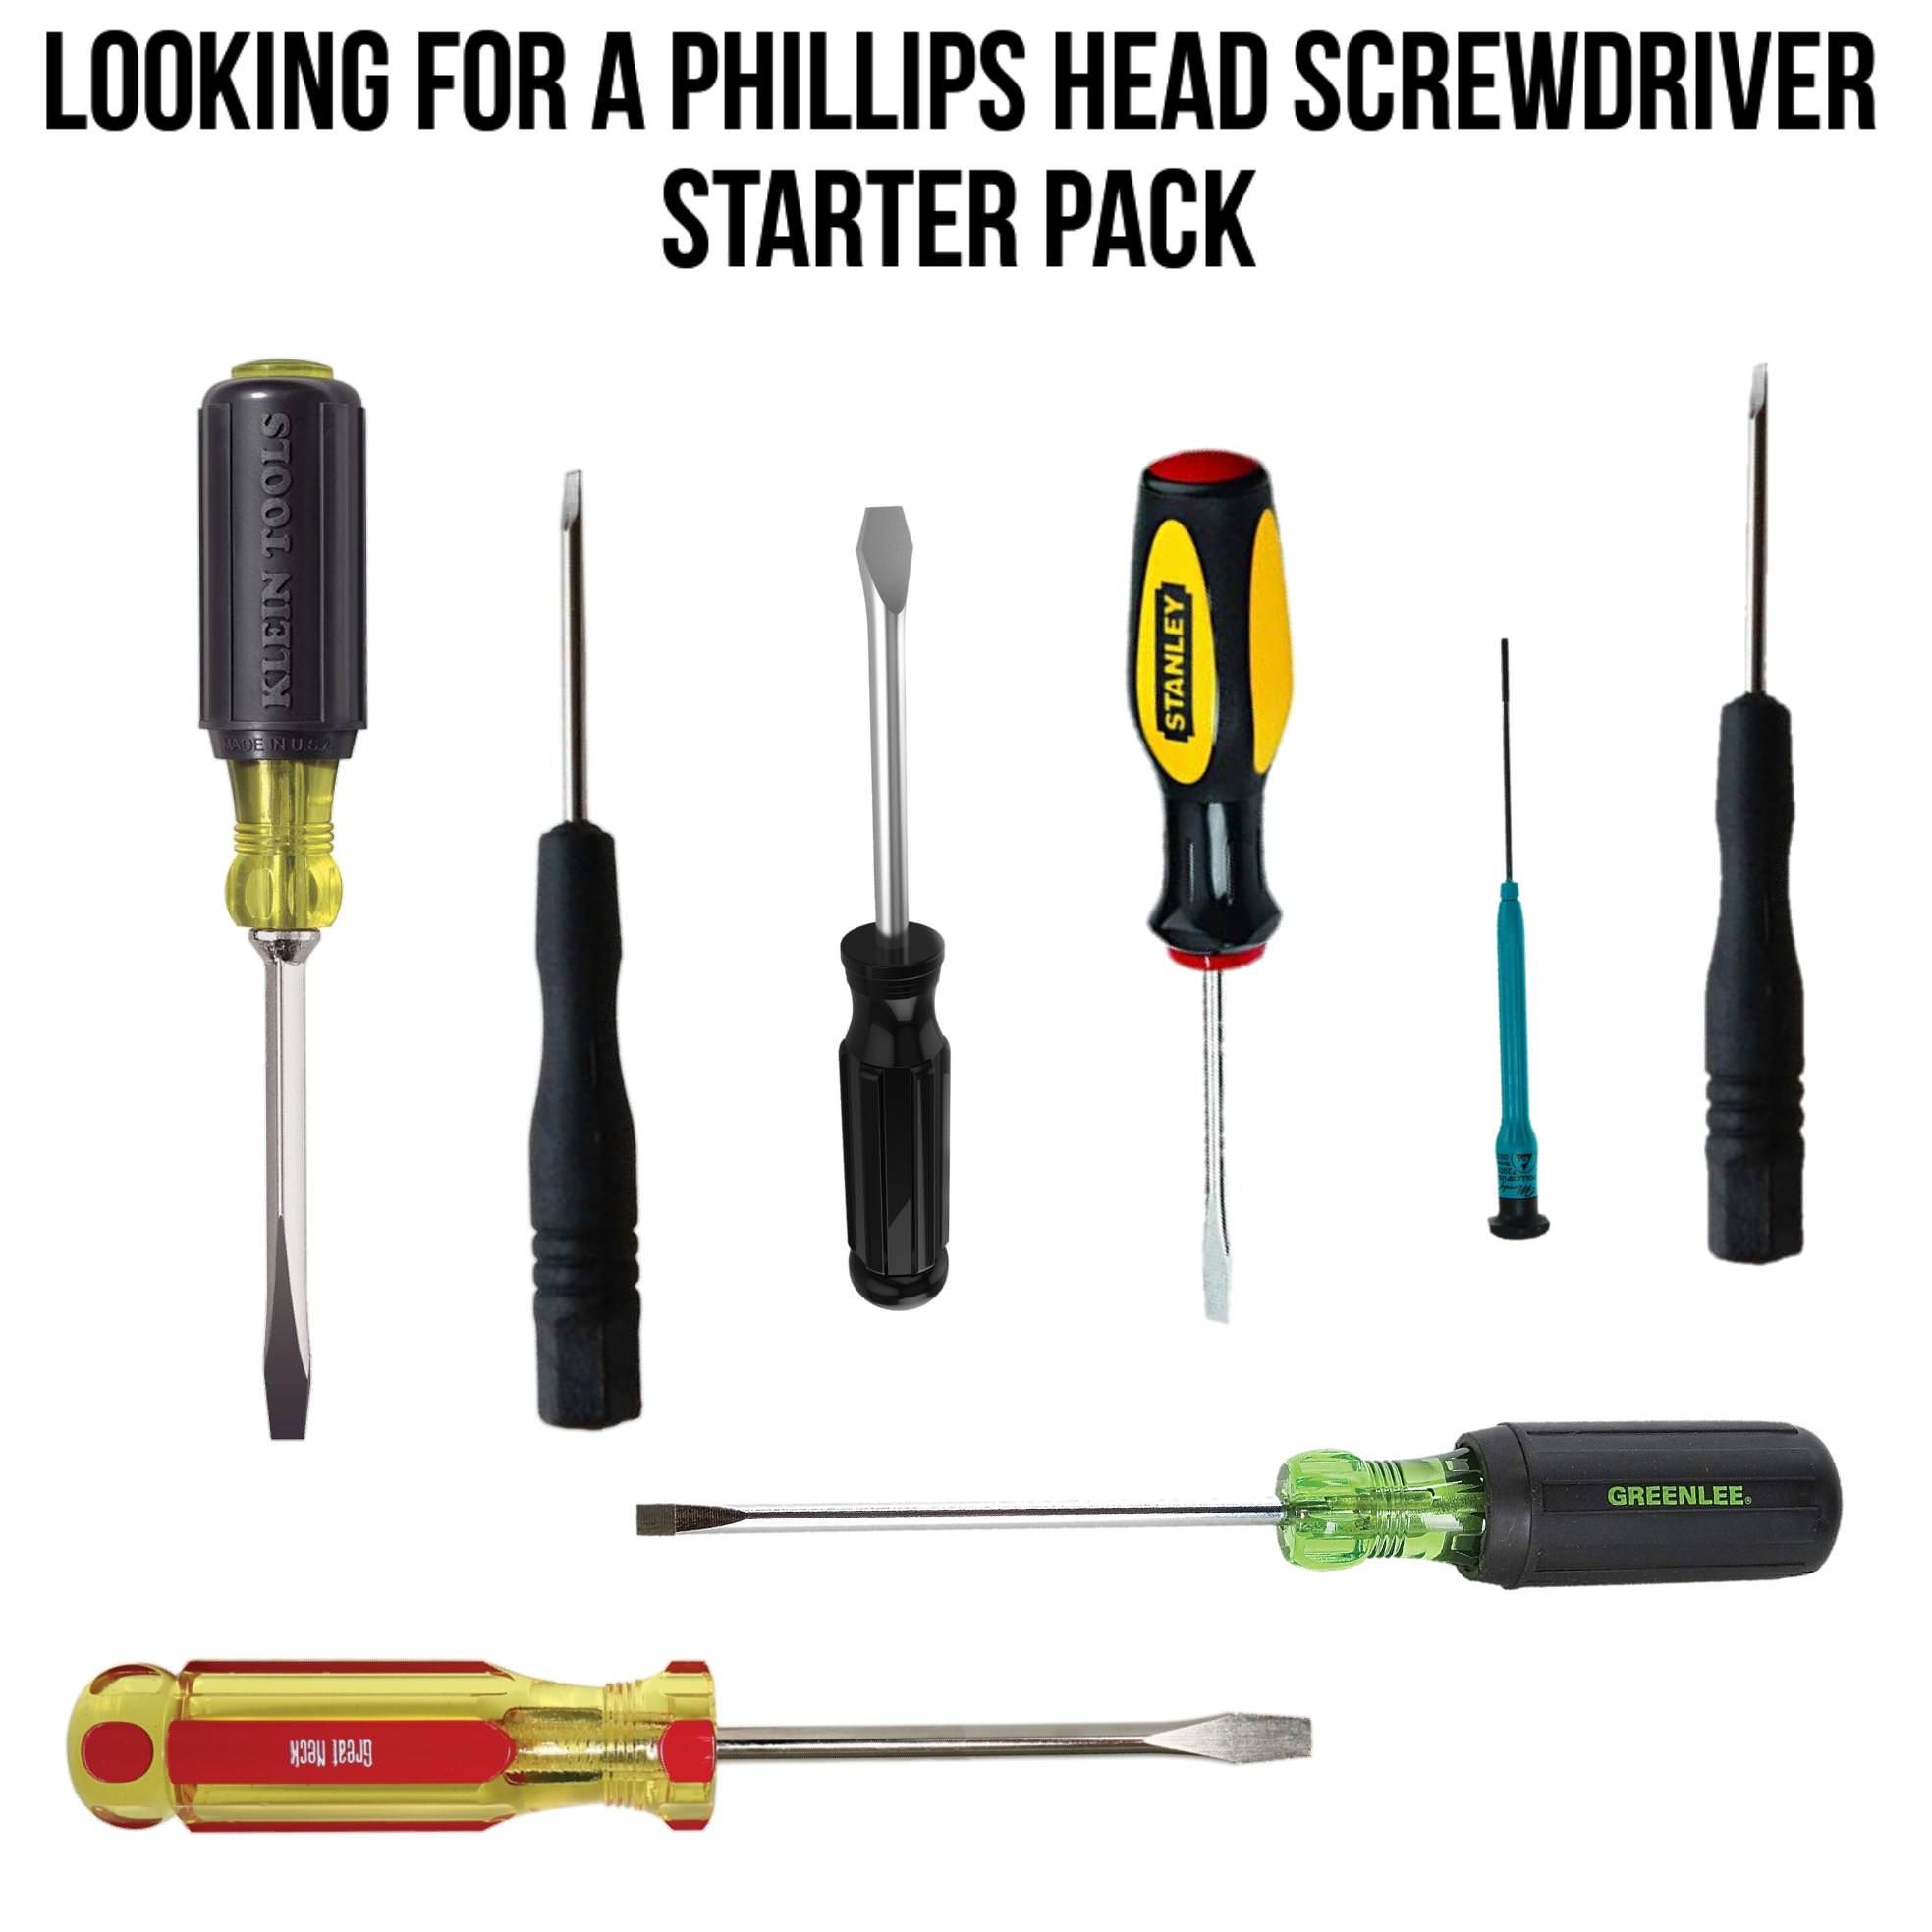 "Looking for a Phillips Head Screwdriver" starter pack